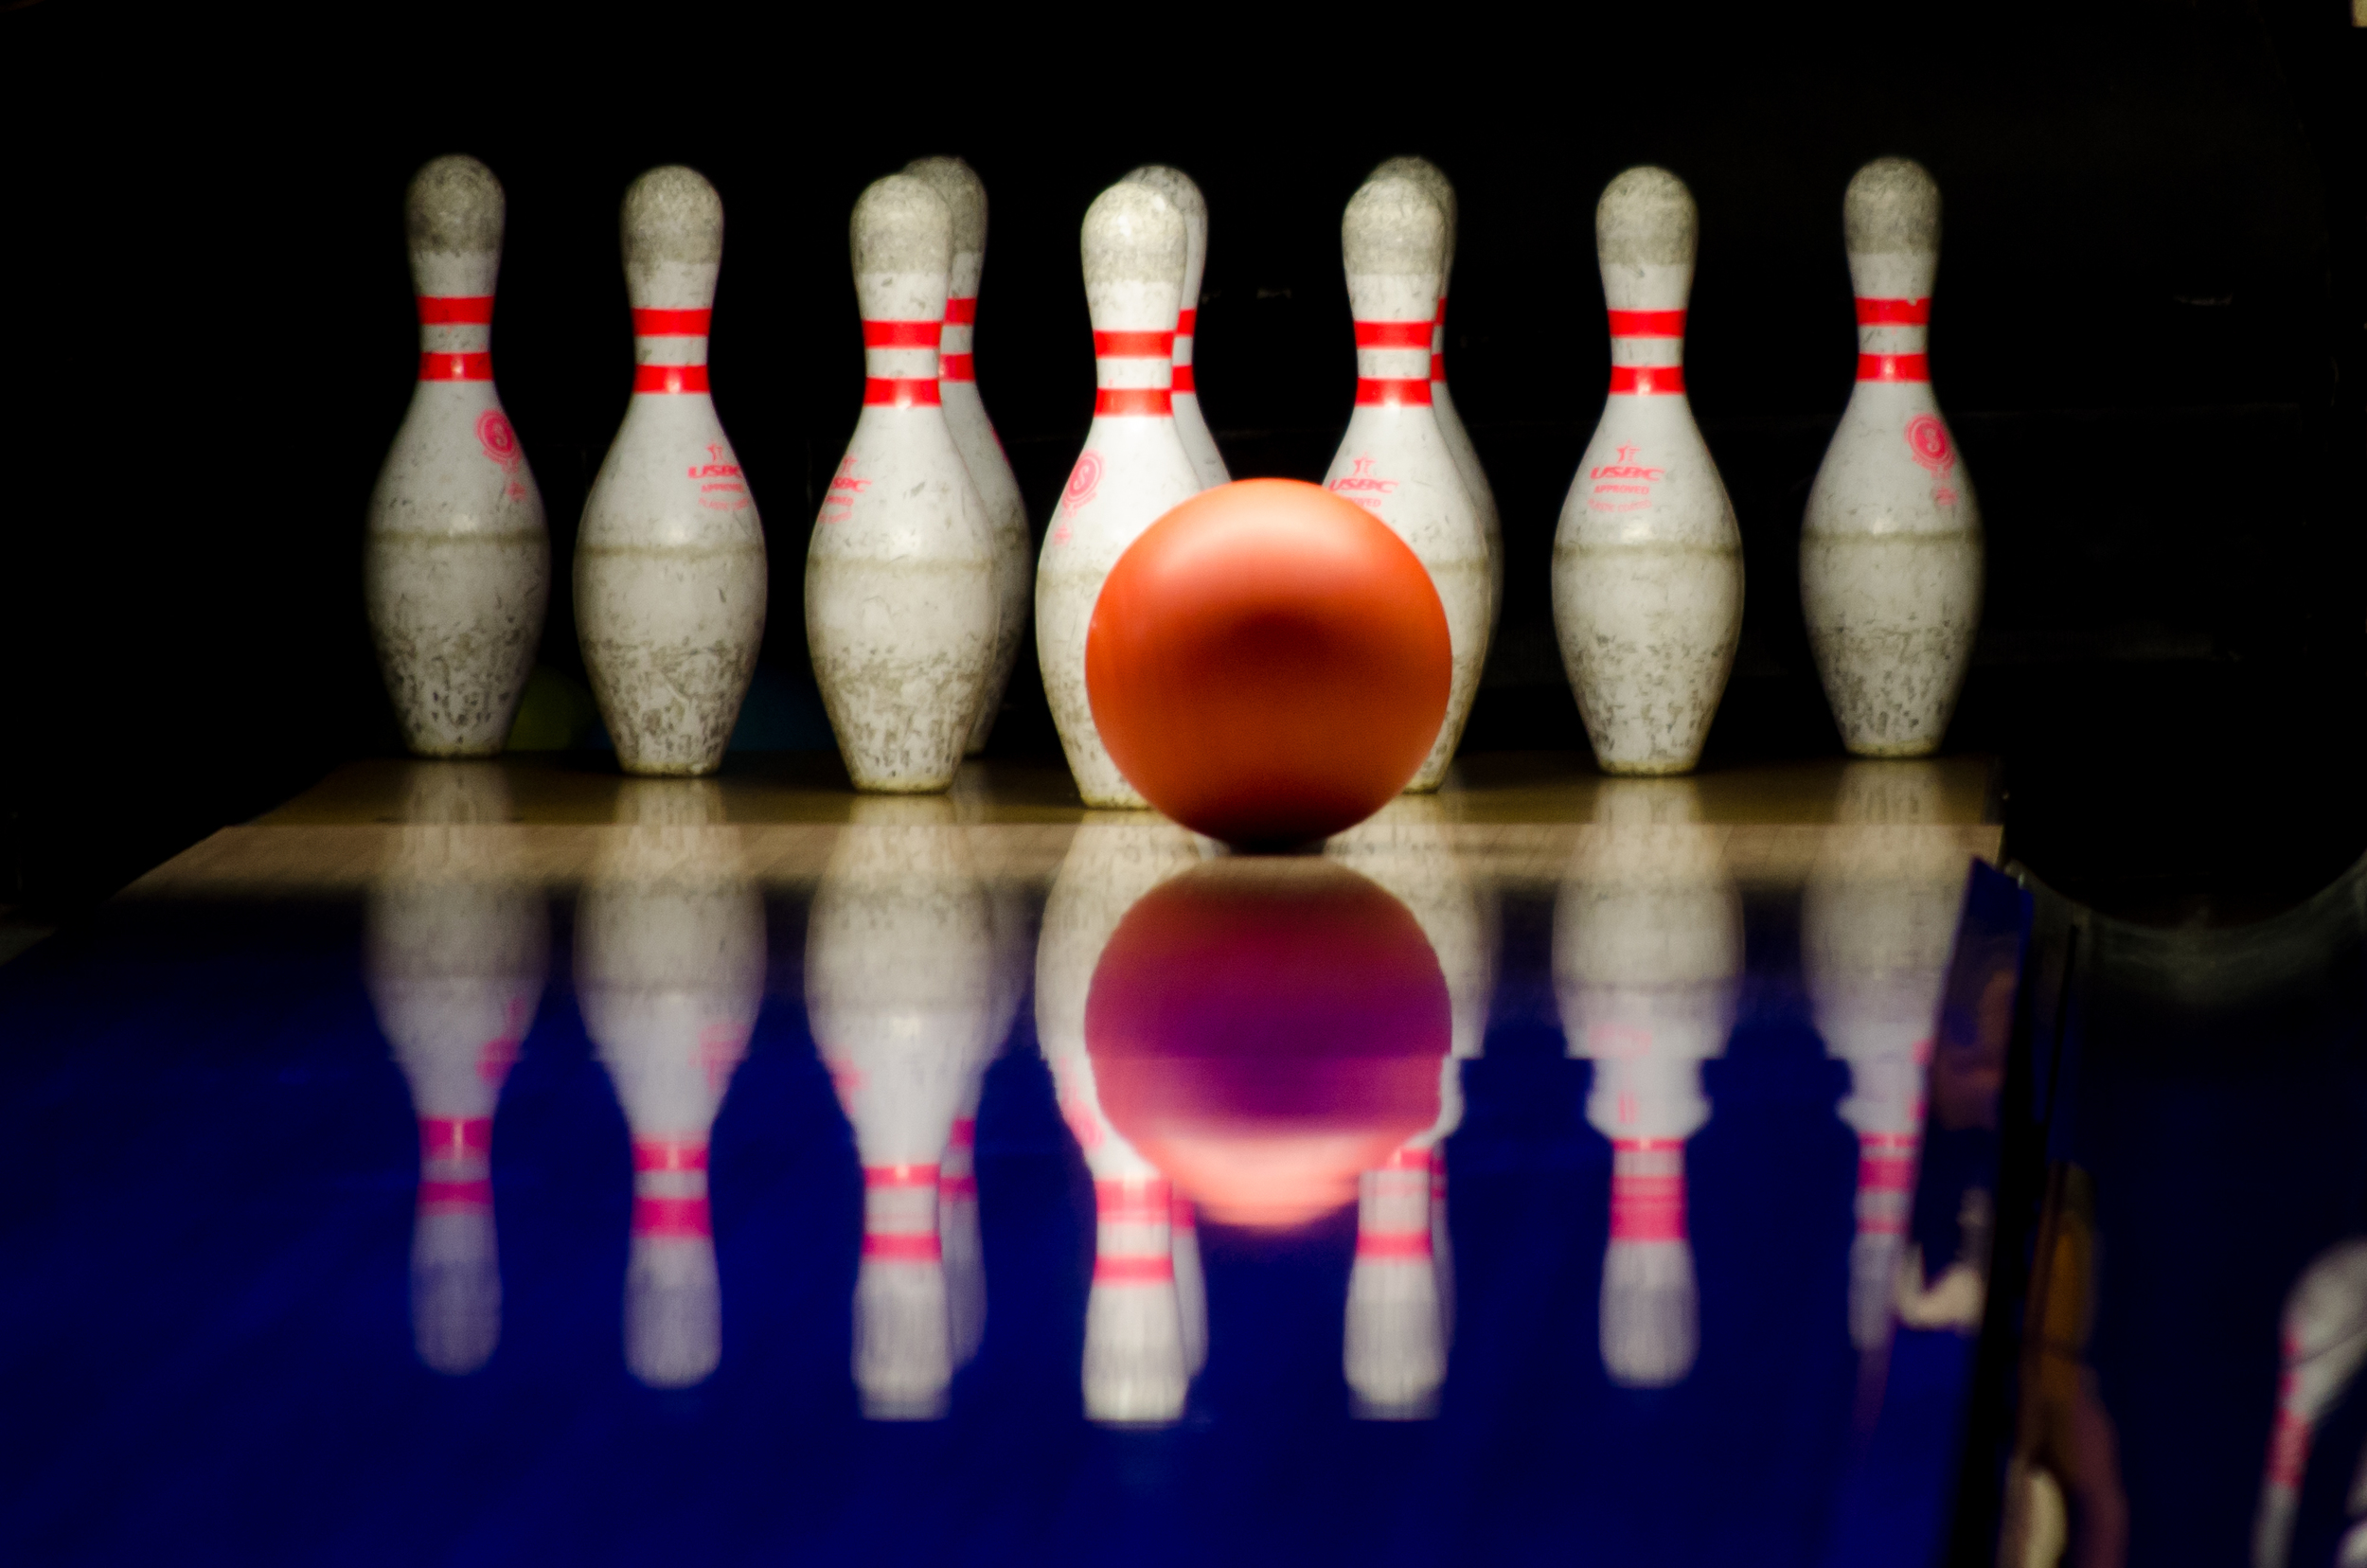 Bowling - Things to do at Lordship's Barns